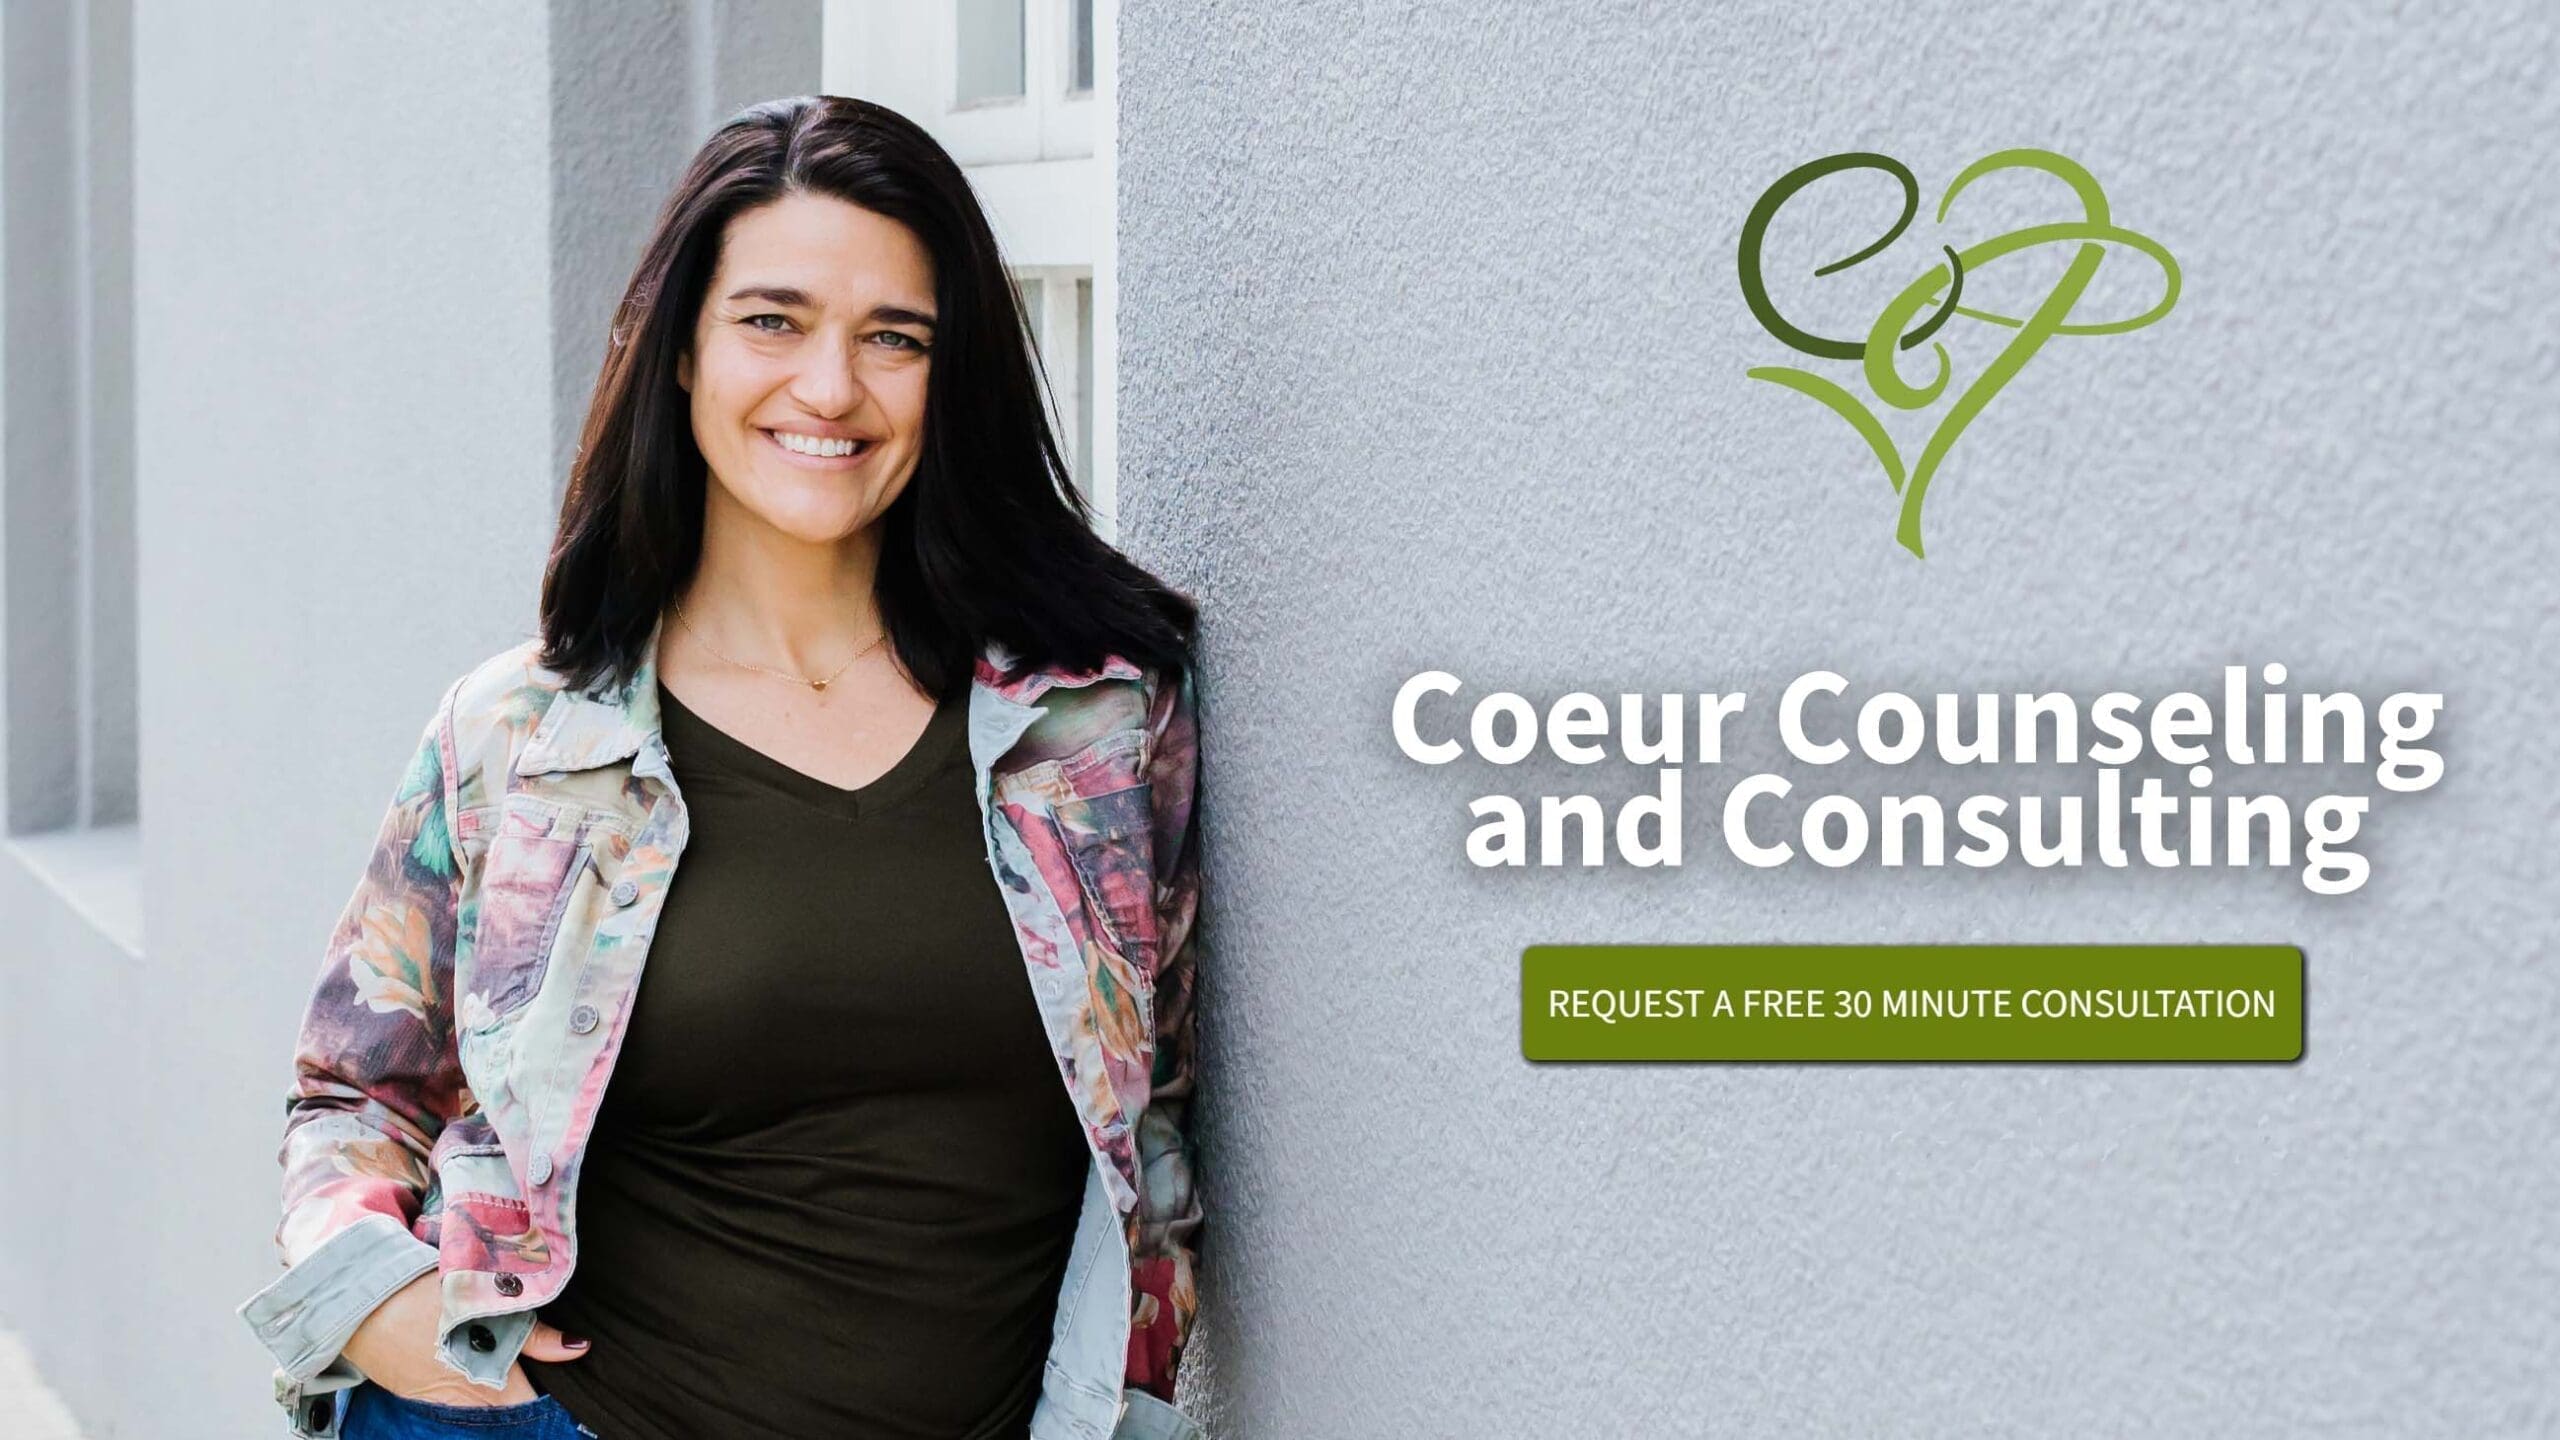 Coeur Counseling & Consulting